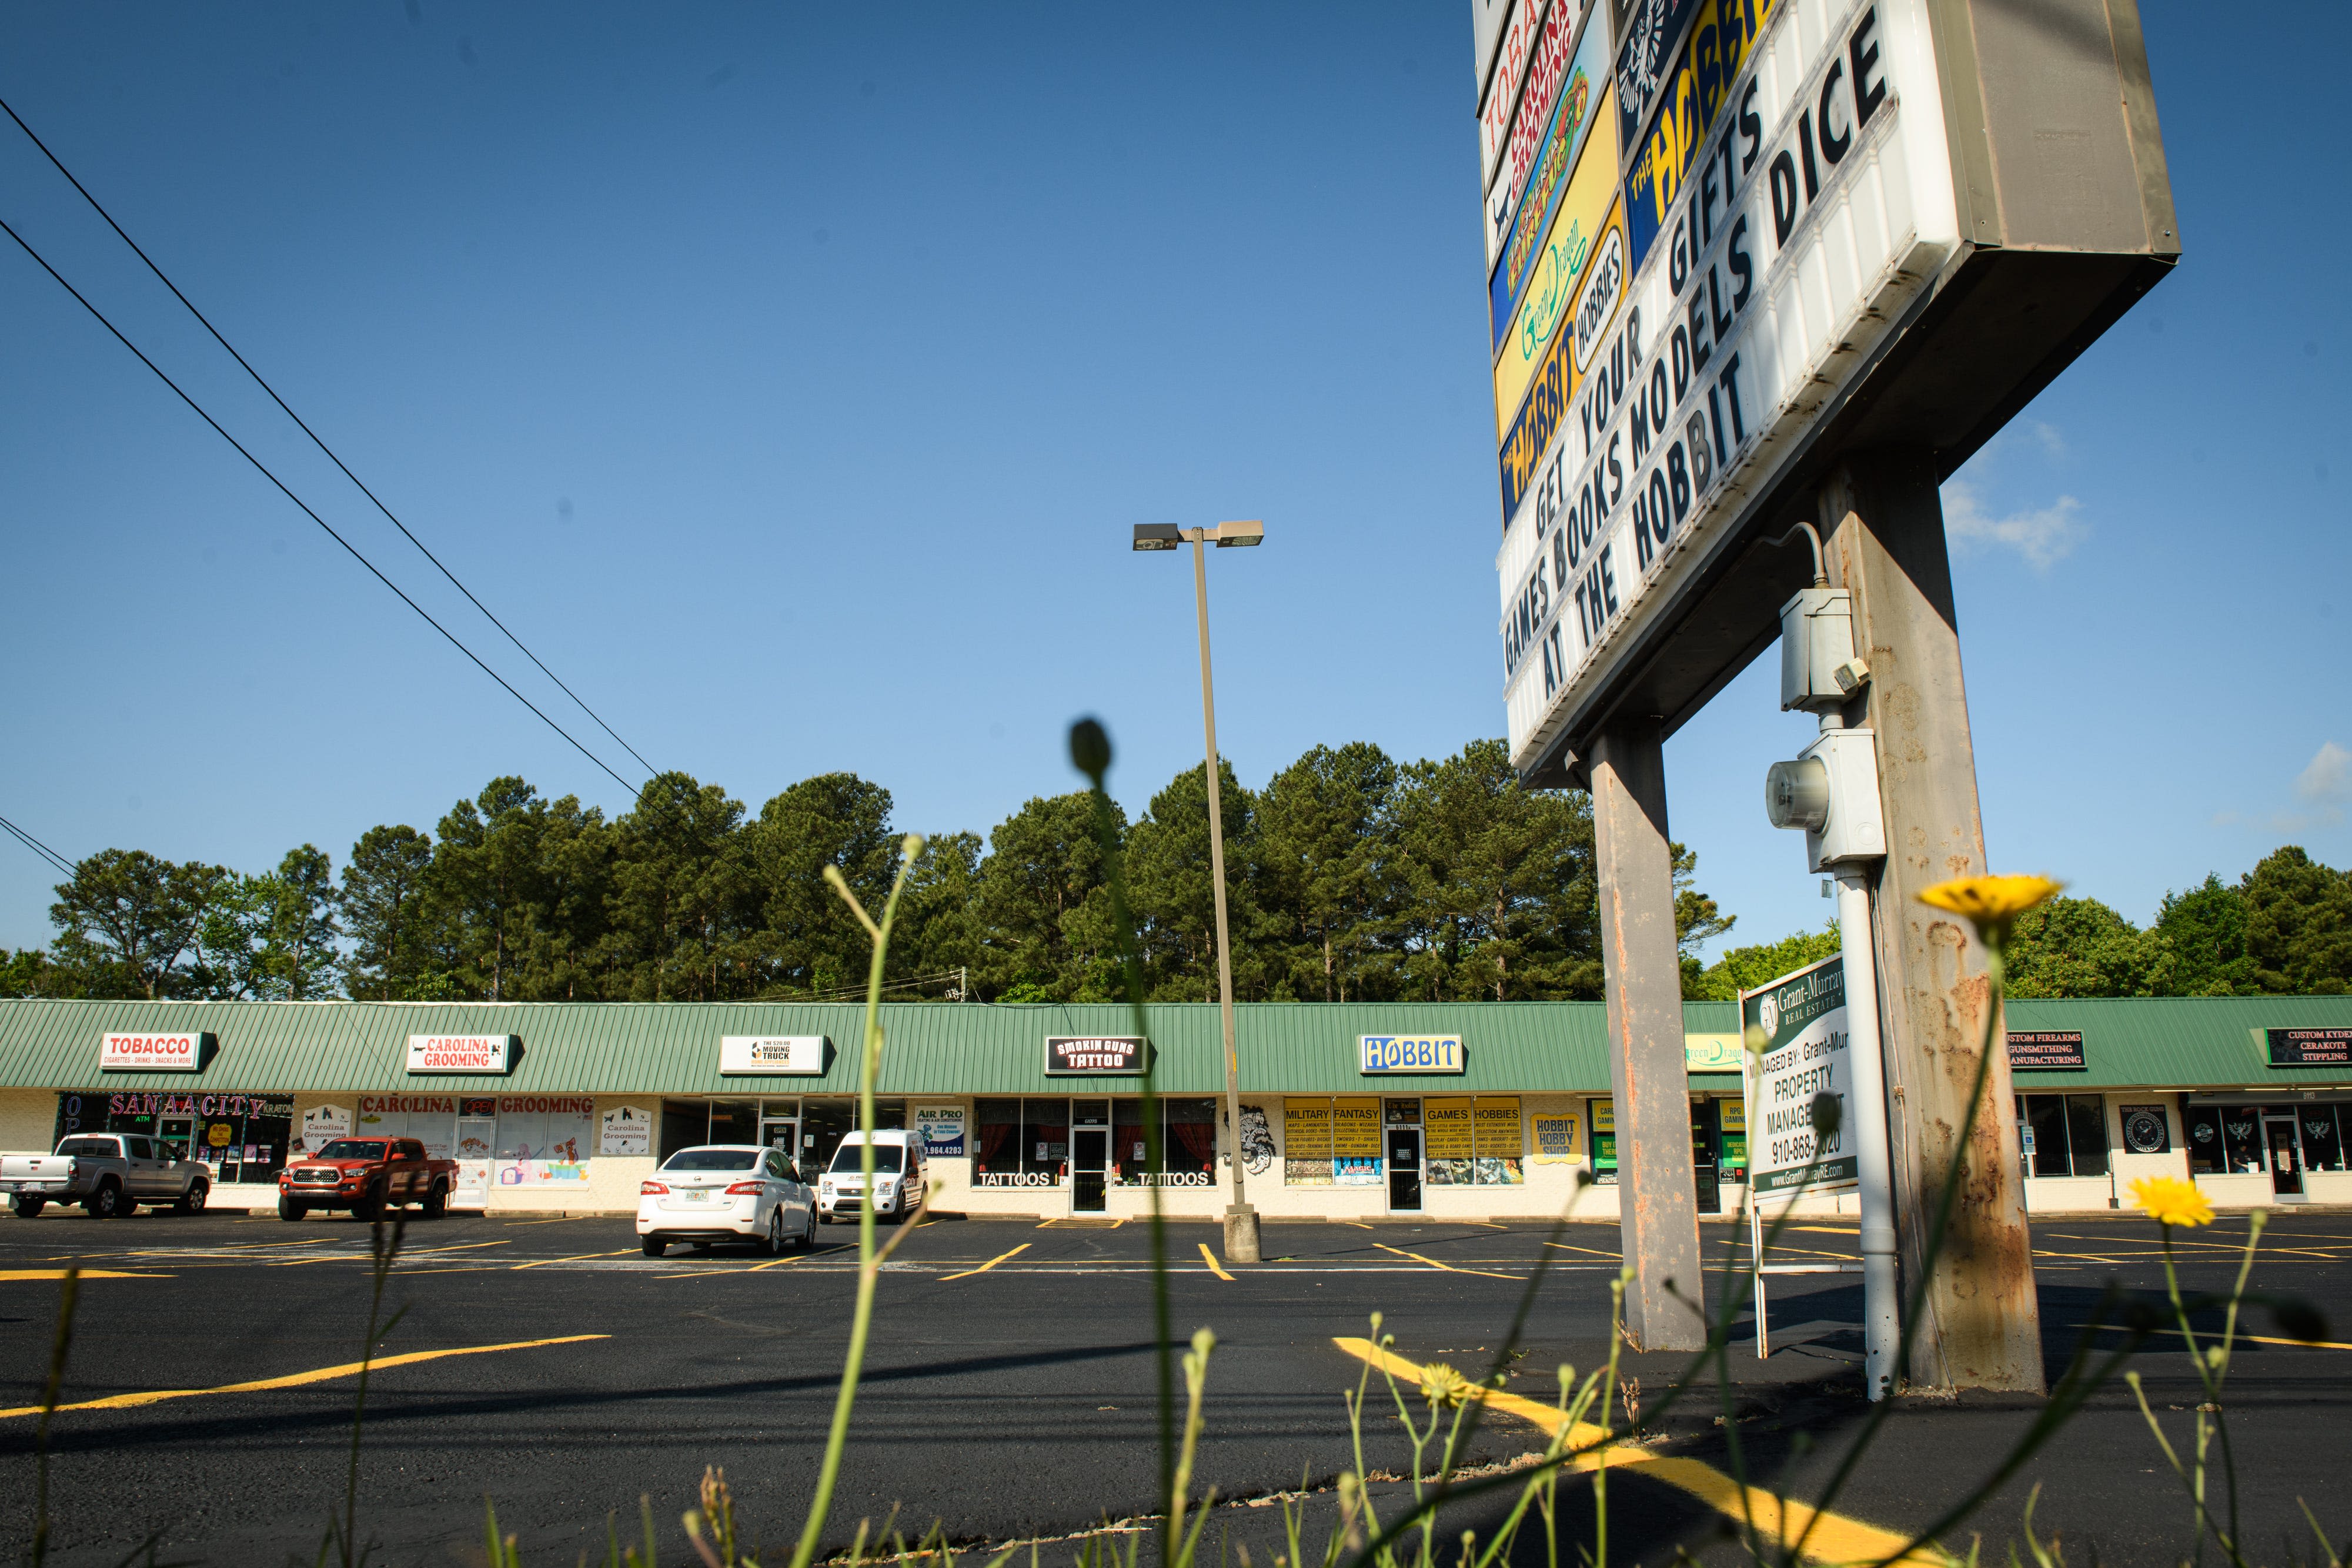 These shopping centers are for sale in Fayetteville. What does that mean for the market?